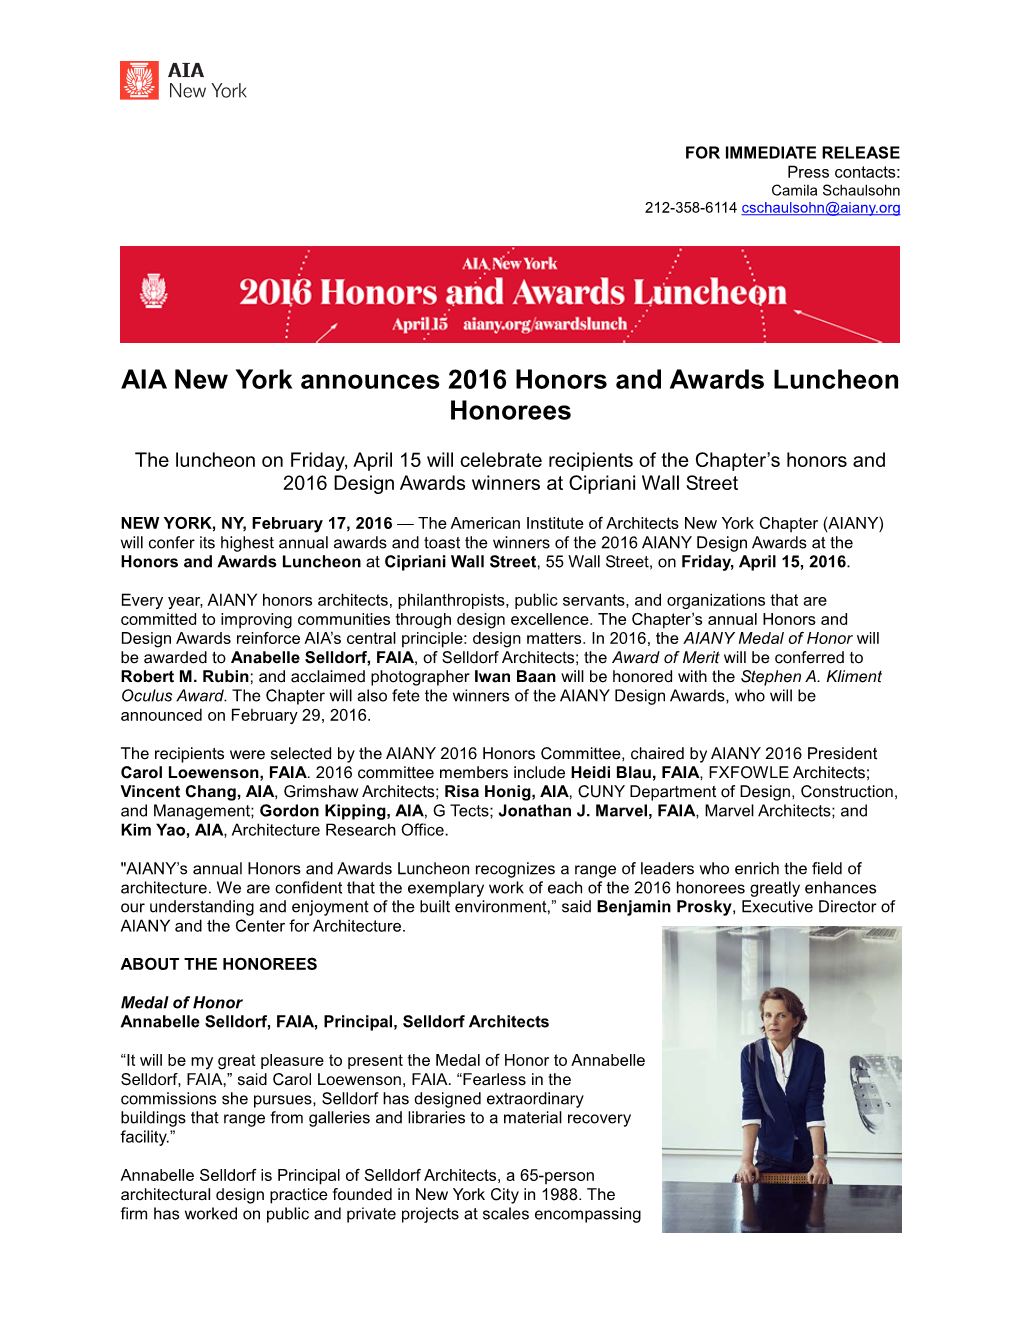 AIA New York Announces 2016 Honors and Awards Luncheon Honorees